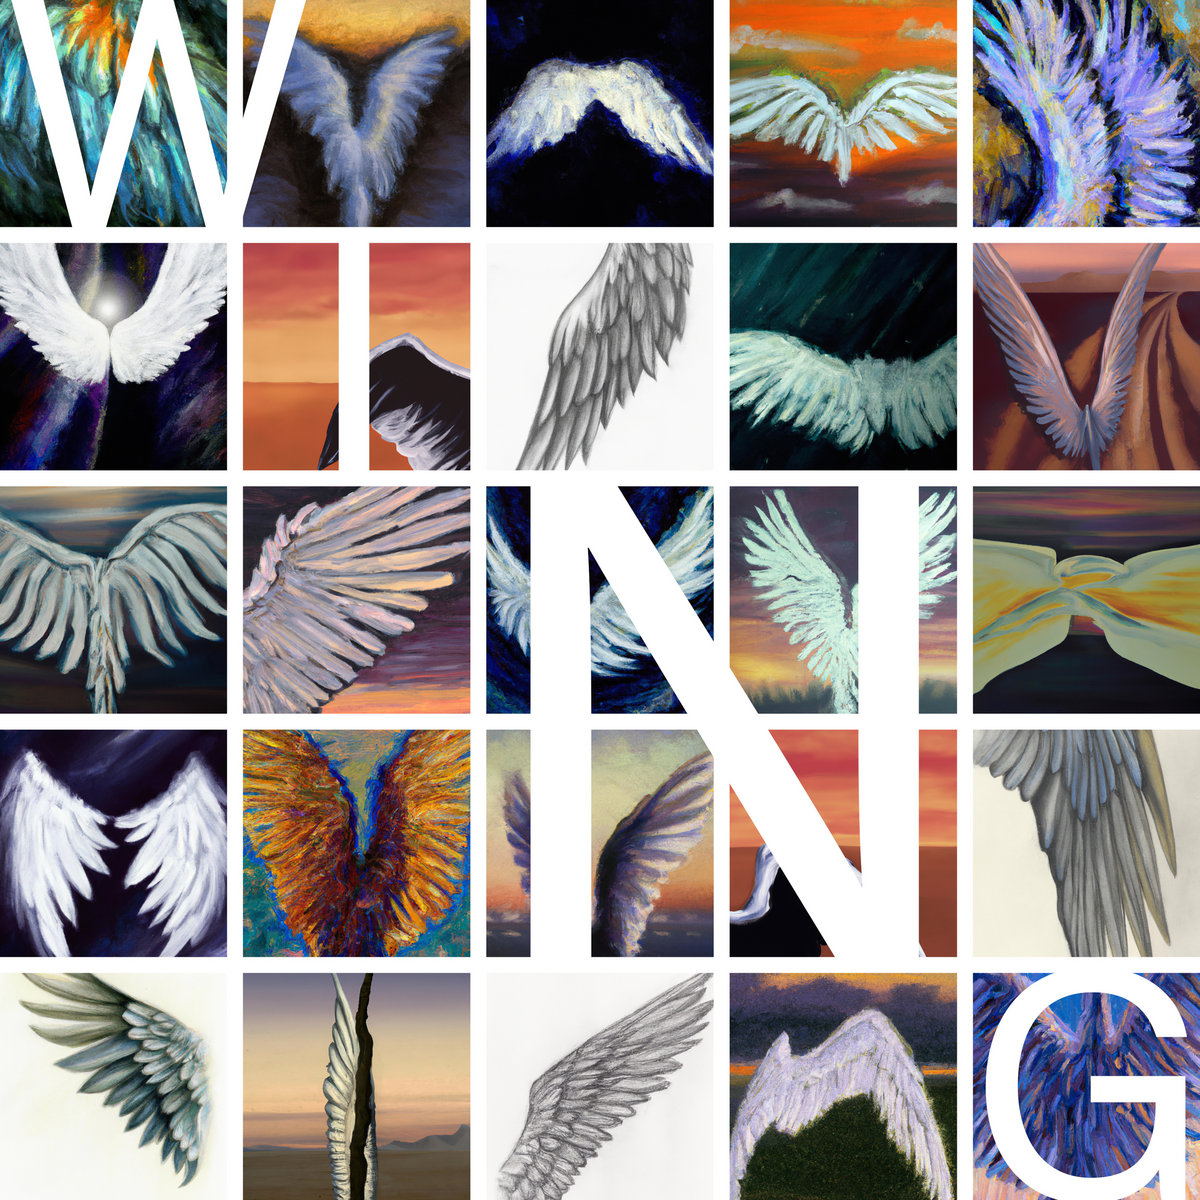 ALBUM REVIEW: Wing by Big Scary